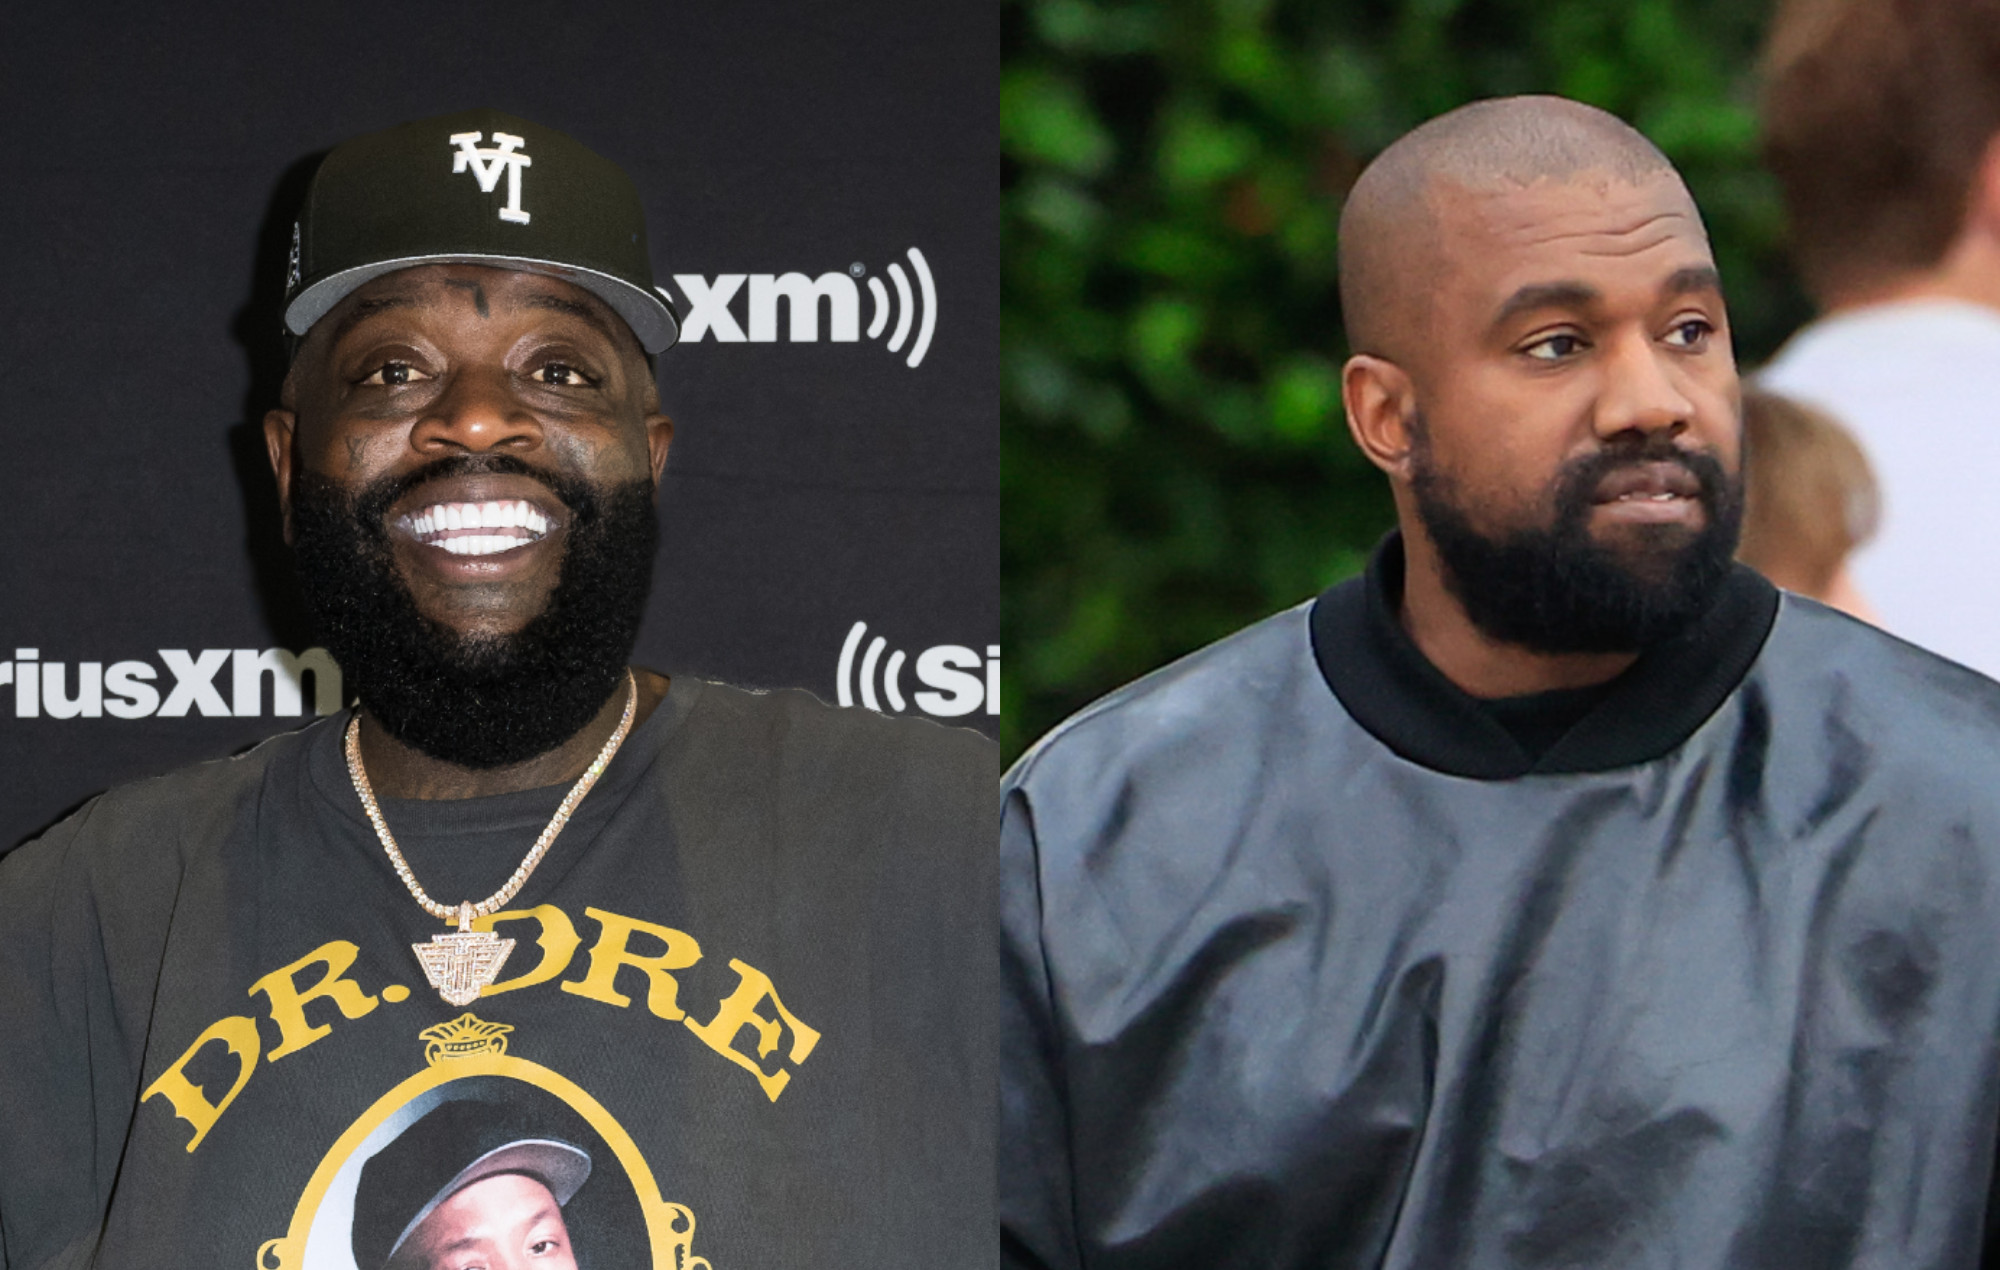 Rick Ross is “interested” in signing Kanye West